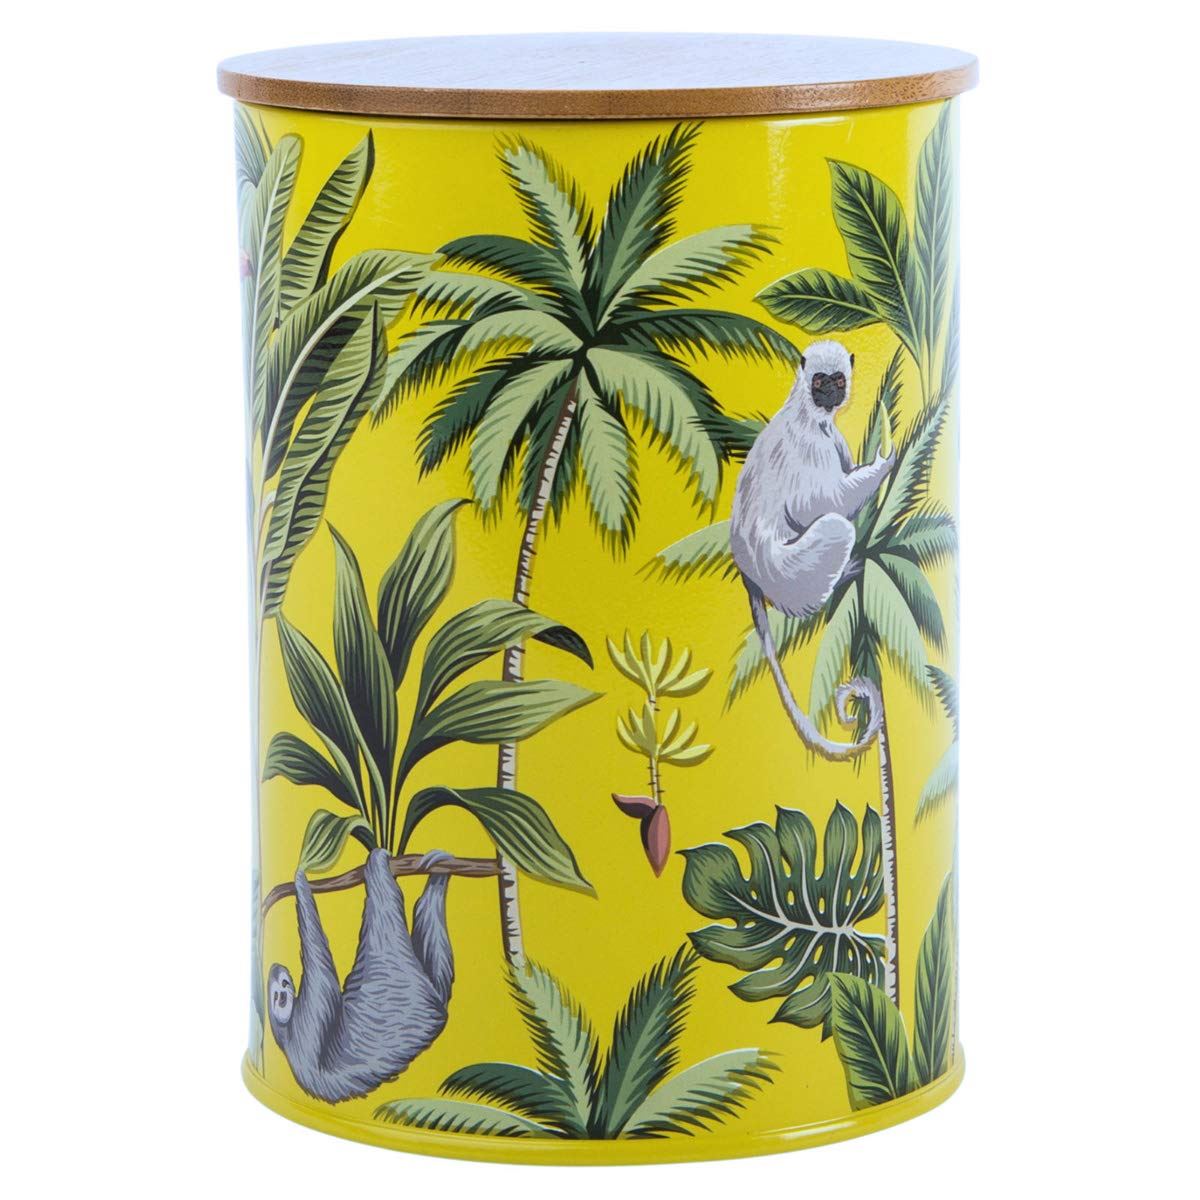 Navigate Summerhouse Madagascar Yellow Sloth Canister